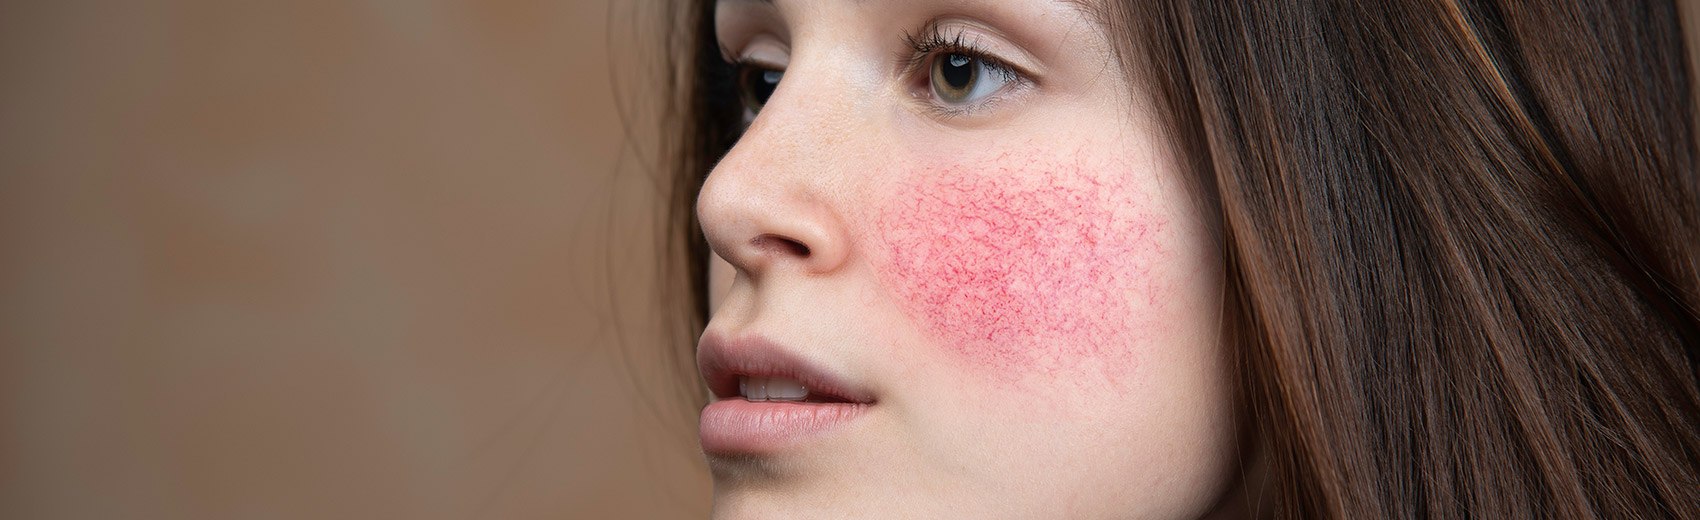 Rosacea - Ginsburg Dermatology Center and Medical Spa